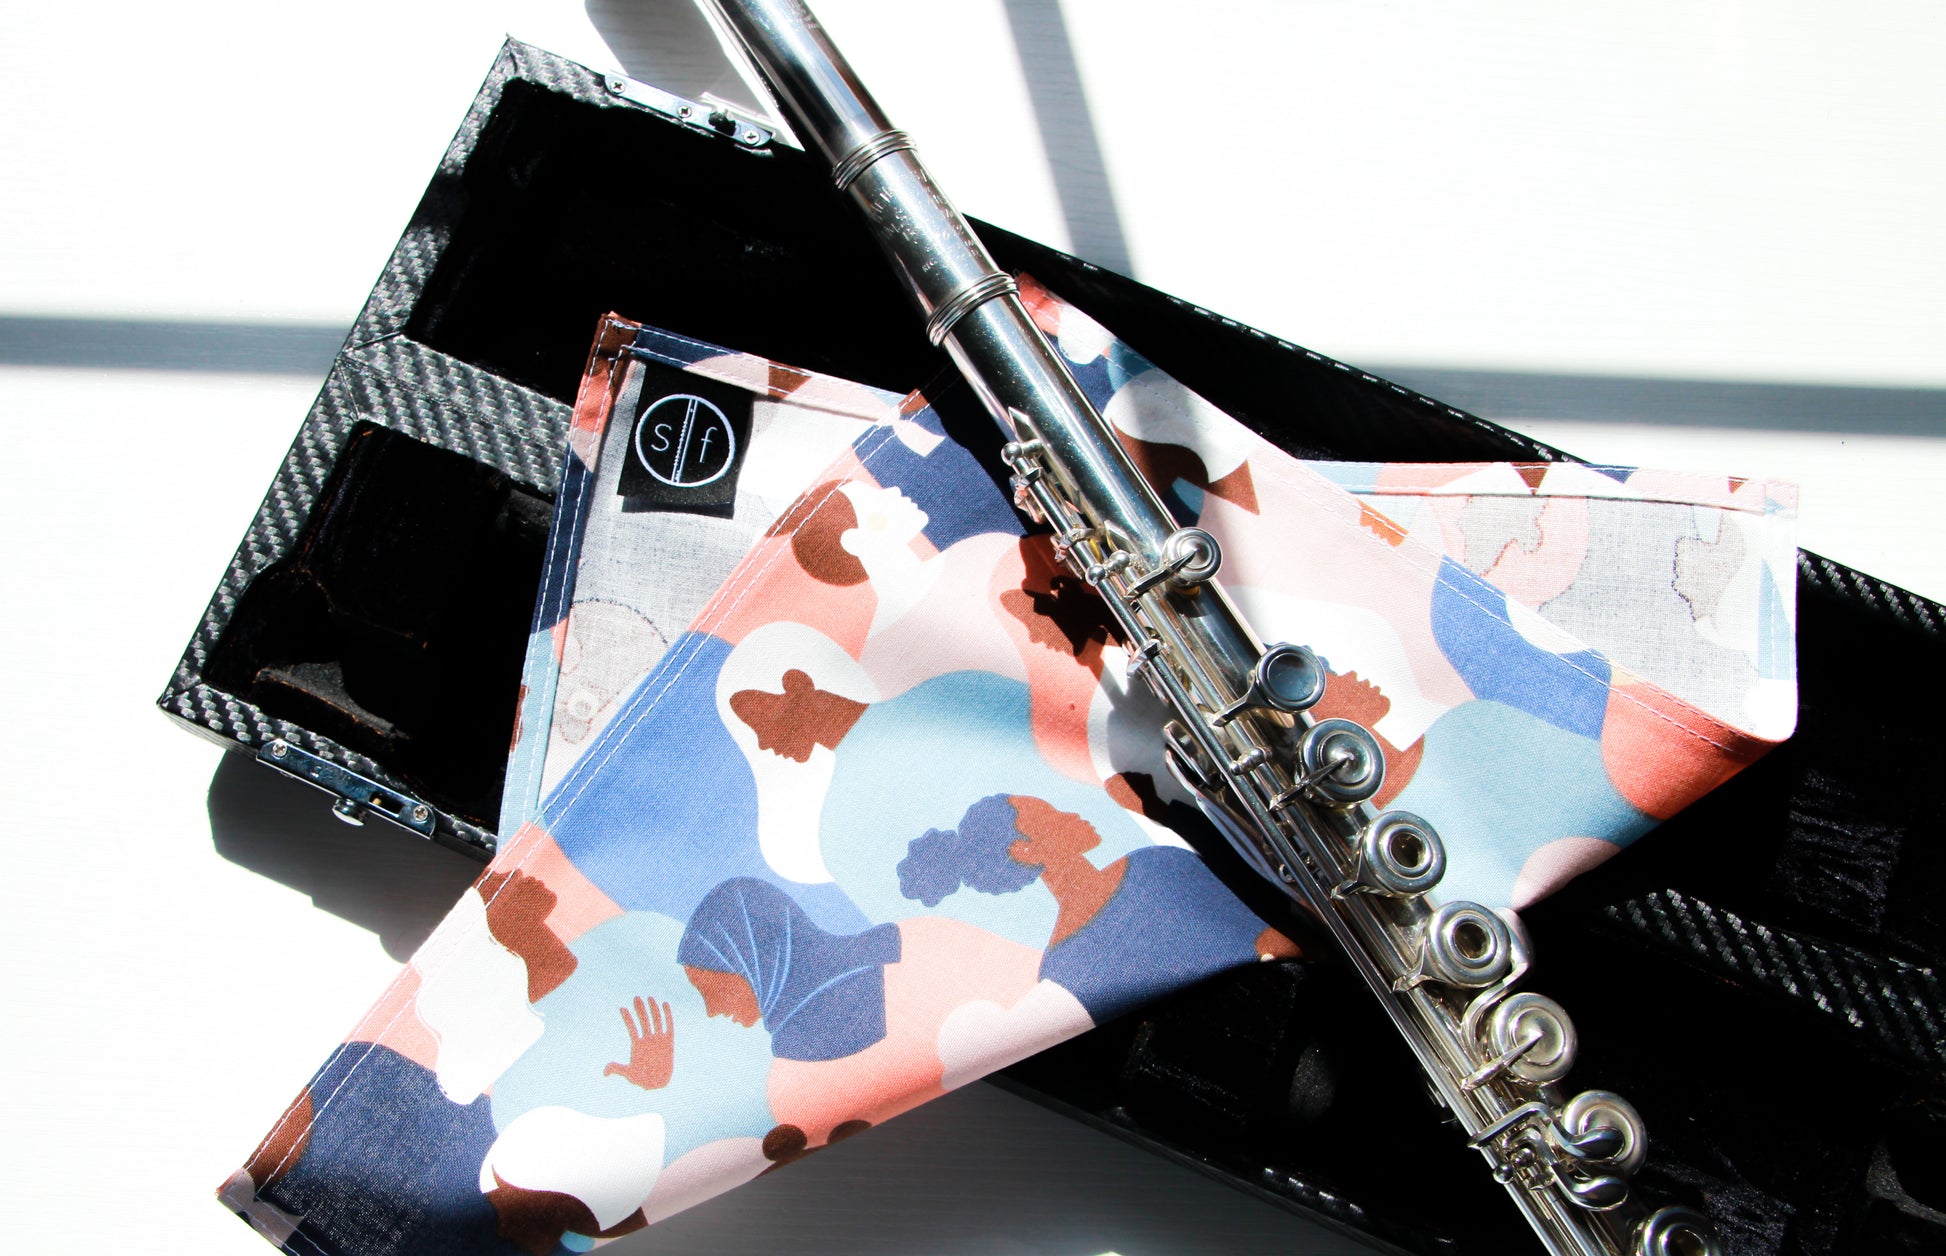 Practice Series Femmes diverses handmade cotton flute cloth made by sempreflute. Handmade in the USA. Flute swab made from 100% cotton.